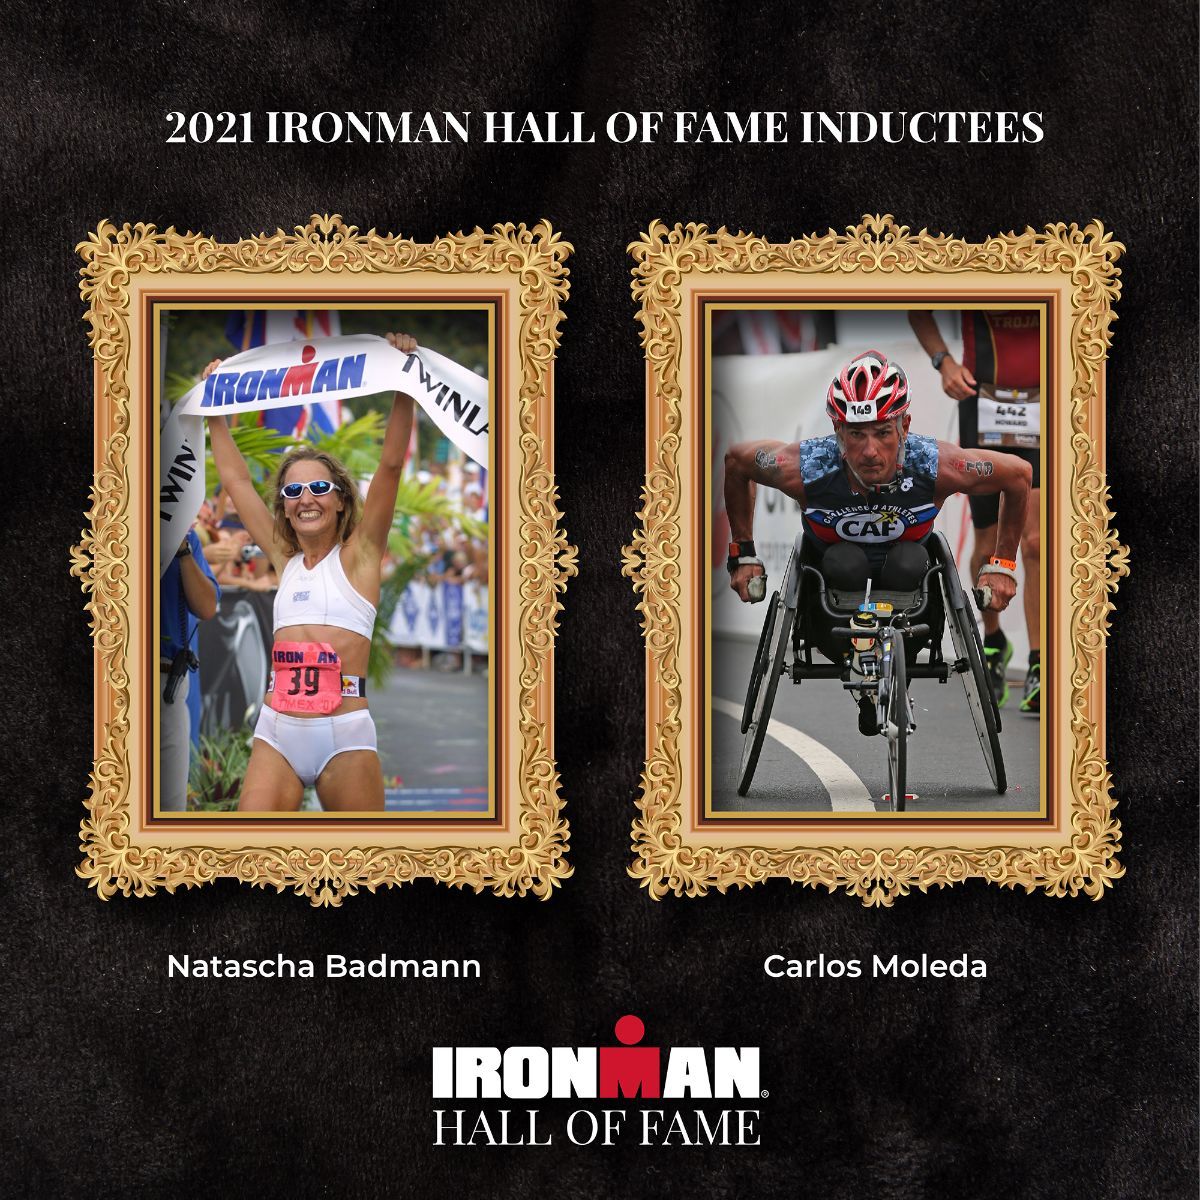 Natascha Badmann And Carlos Moleda To Be Inducted Into Ironman Hall Of Fame